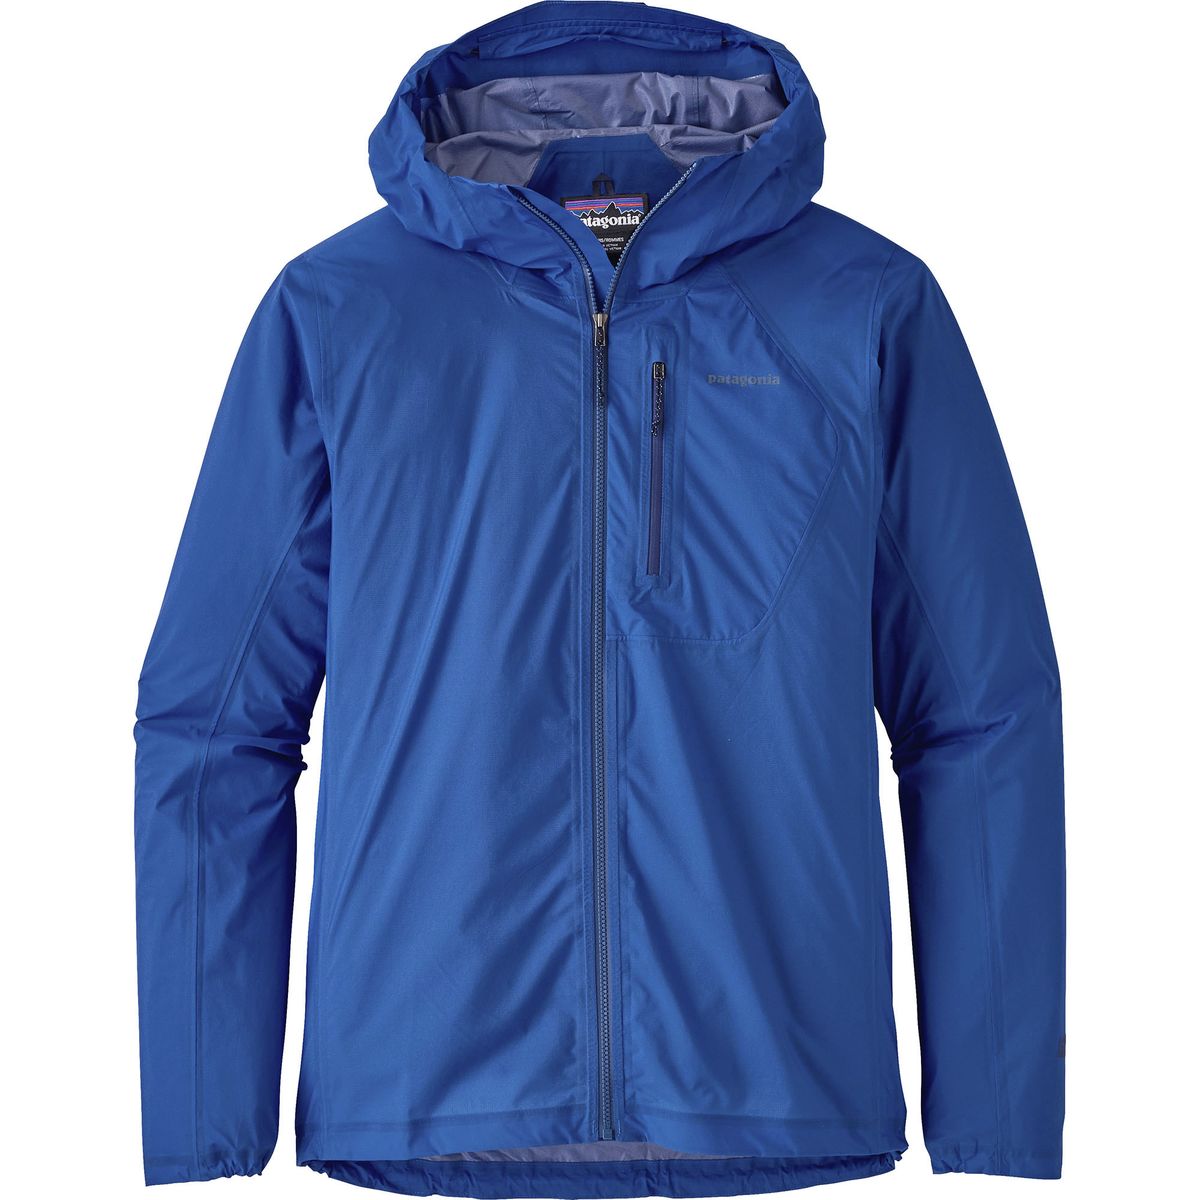 Patagonia Storm Racer Jacket | Blister